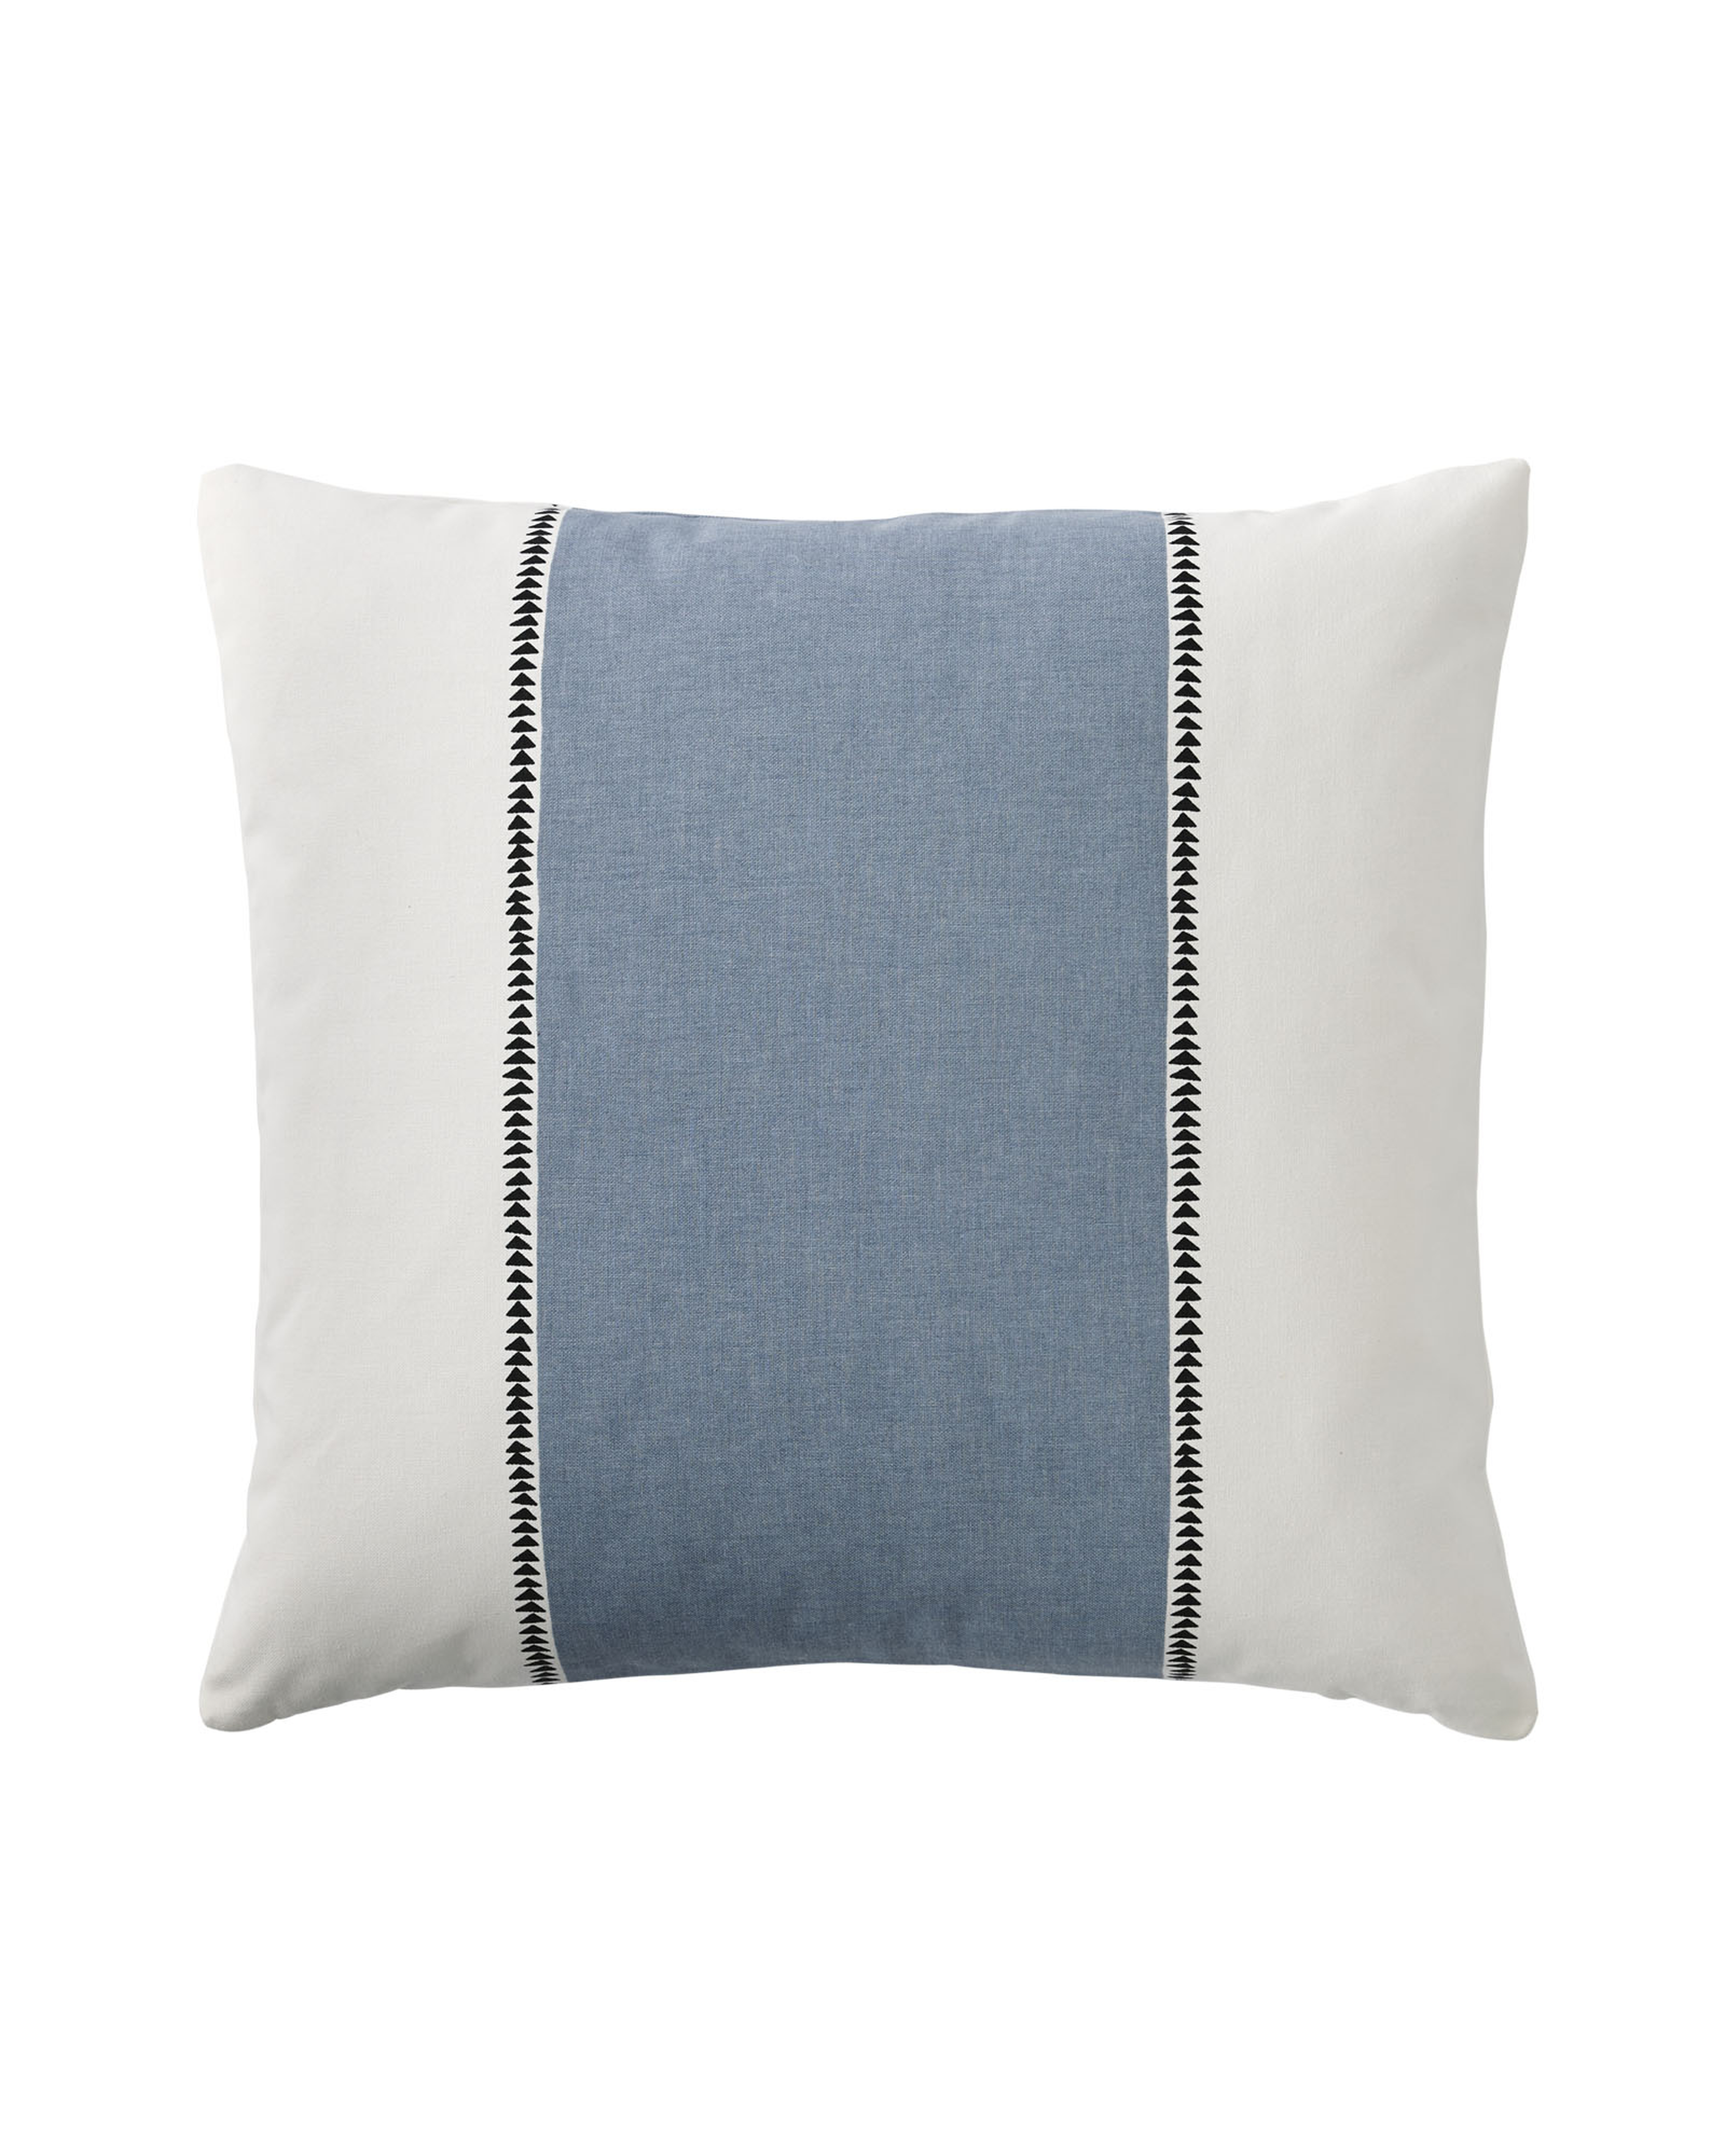 Racing Stripe Pillow Covers - Chambray - 20" x 20" - Insert Not Included - Serena and Lily